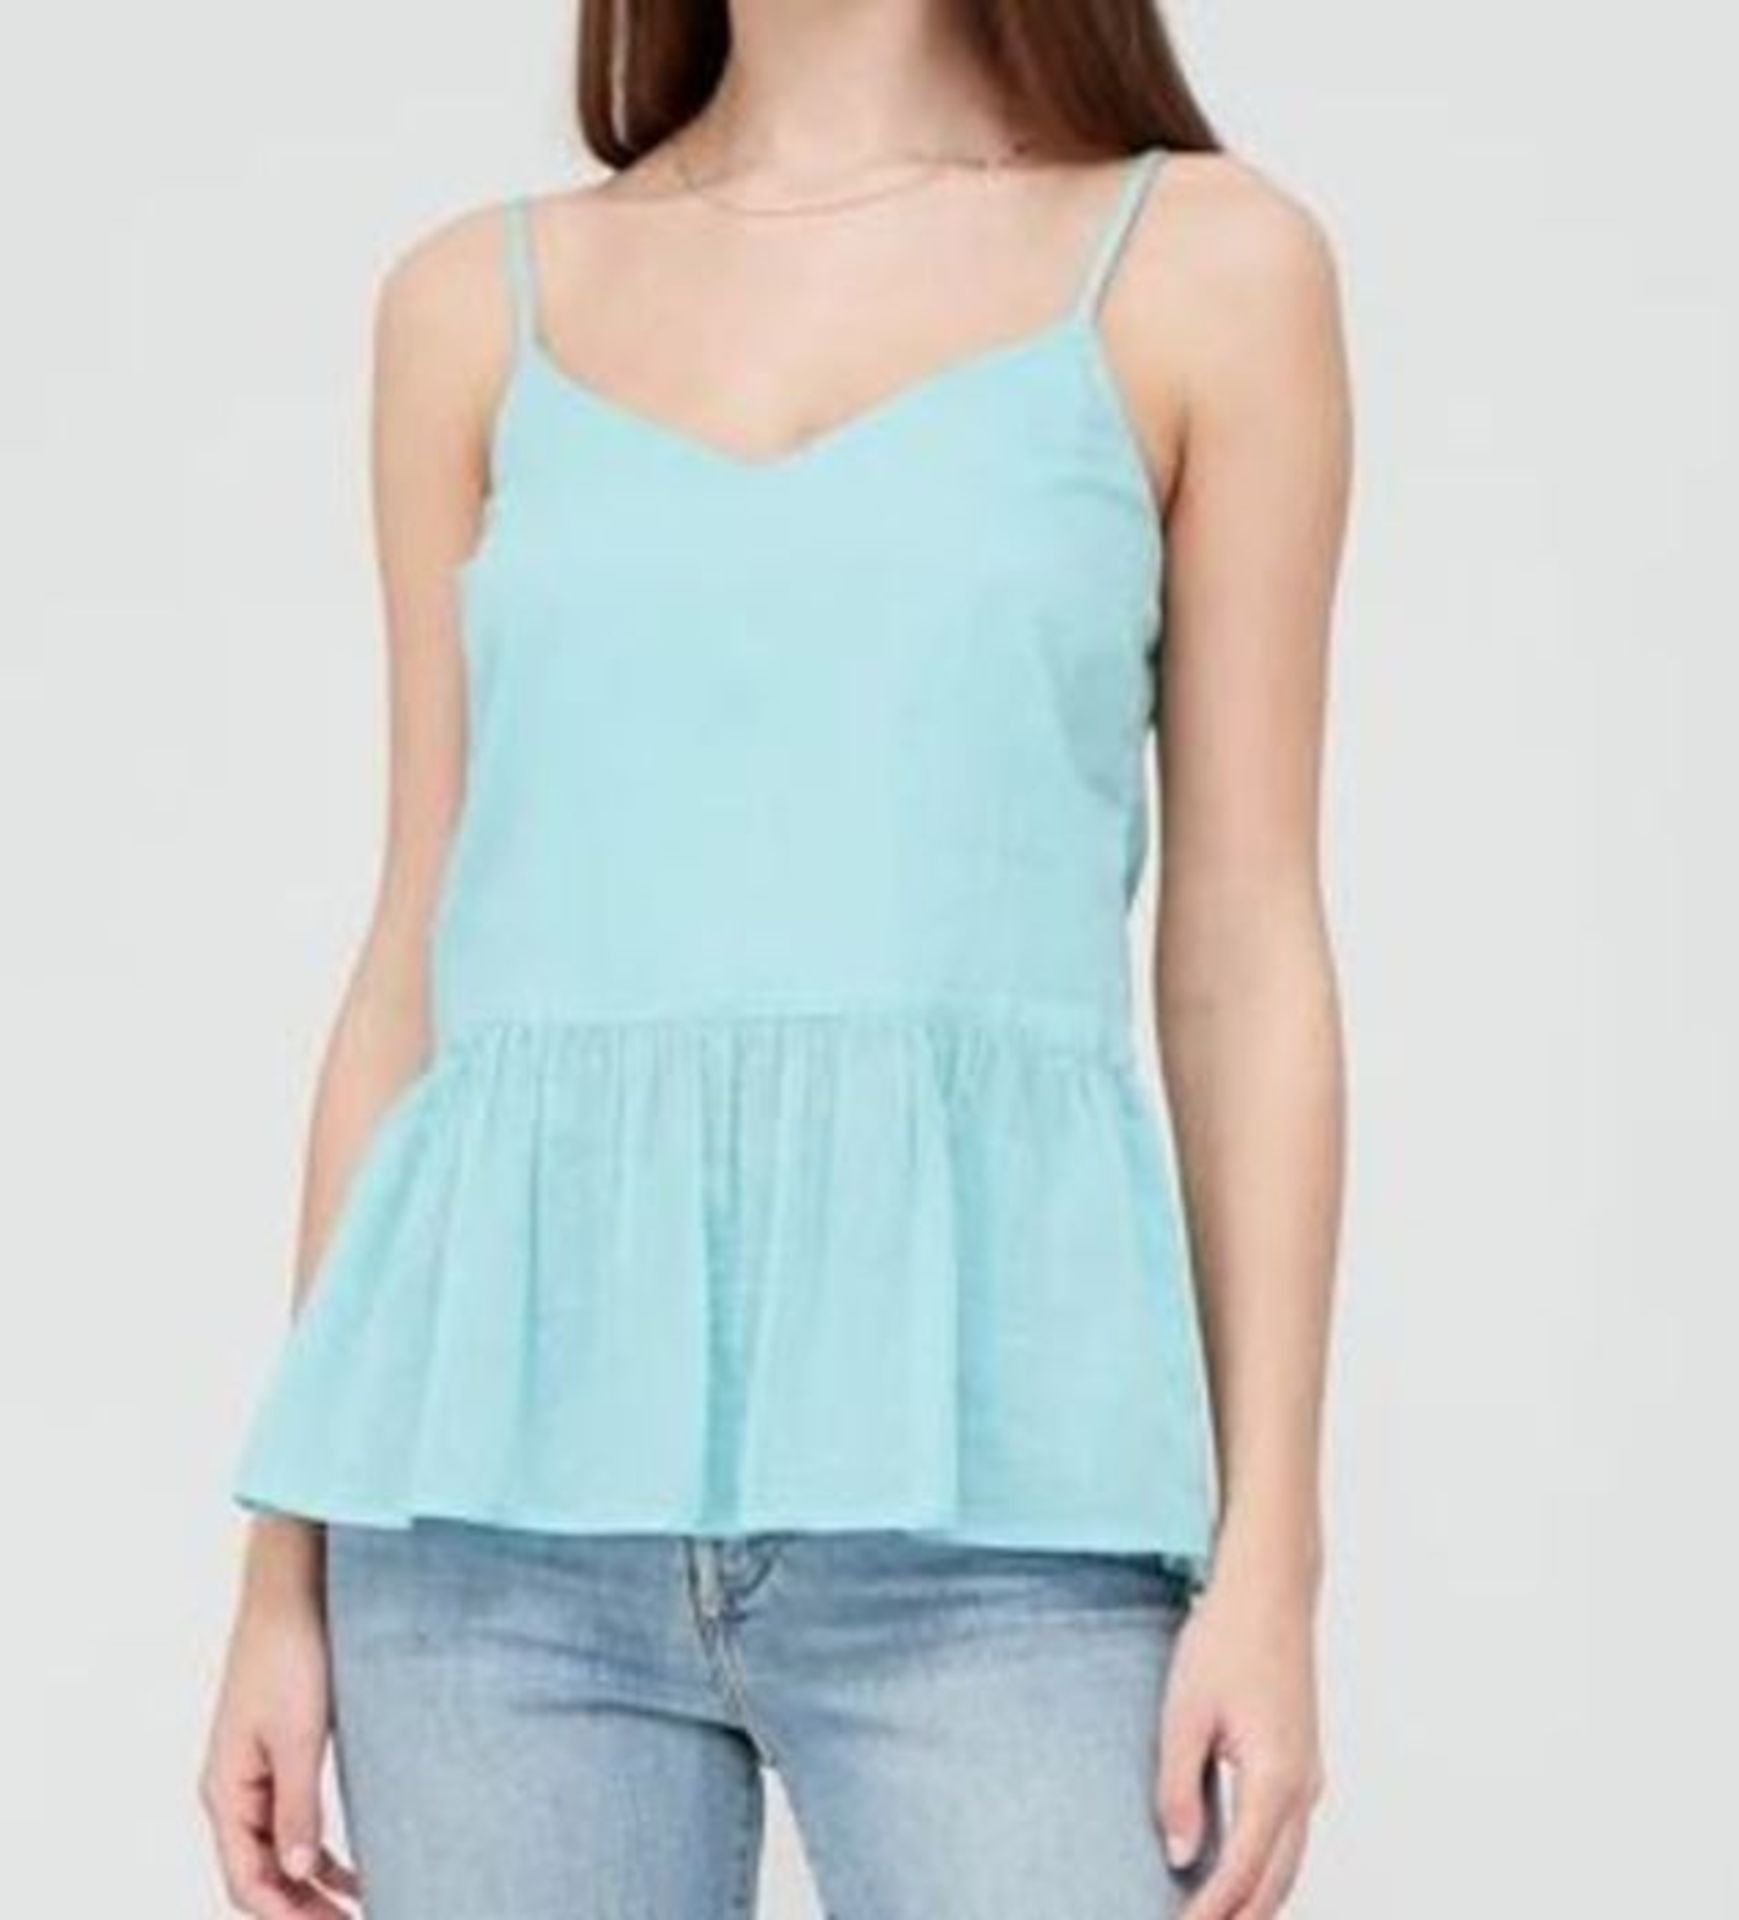 1 X V BY VERY GATHERED COTTON CAMI - TURQUOISE / SIZE 20 / RRP £18.00 / BRAND NEW / WITH TAGS